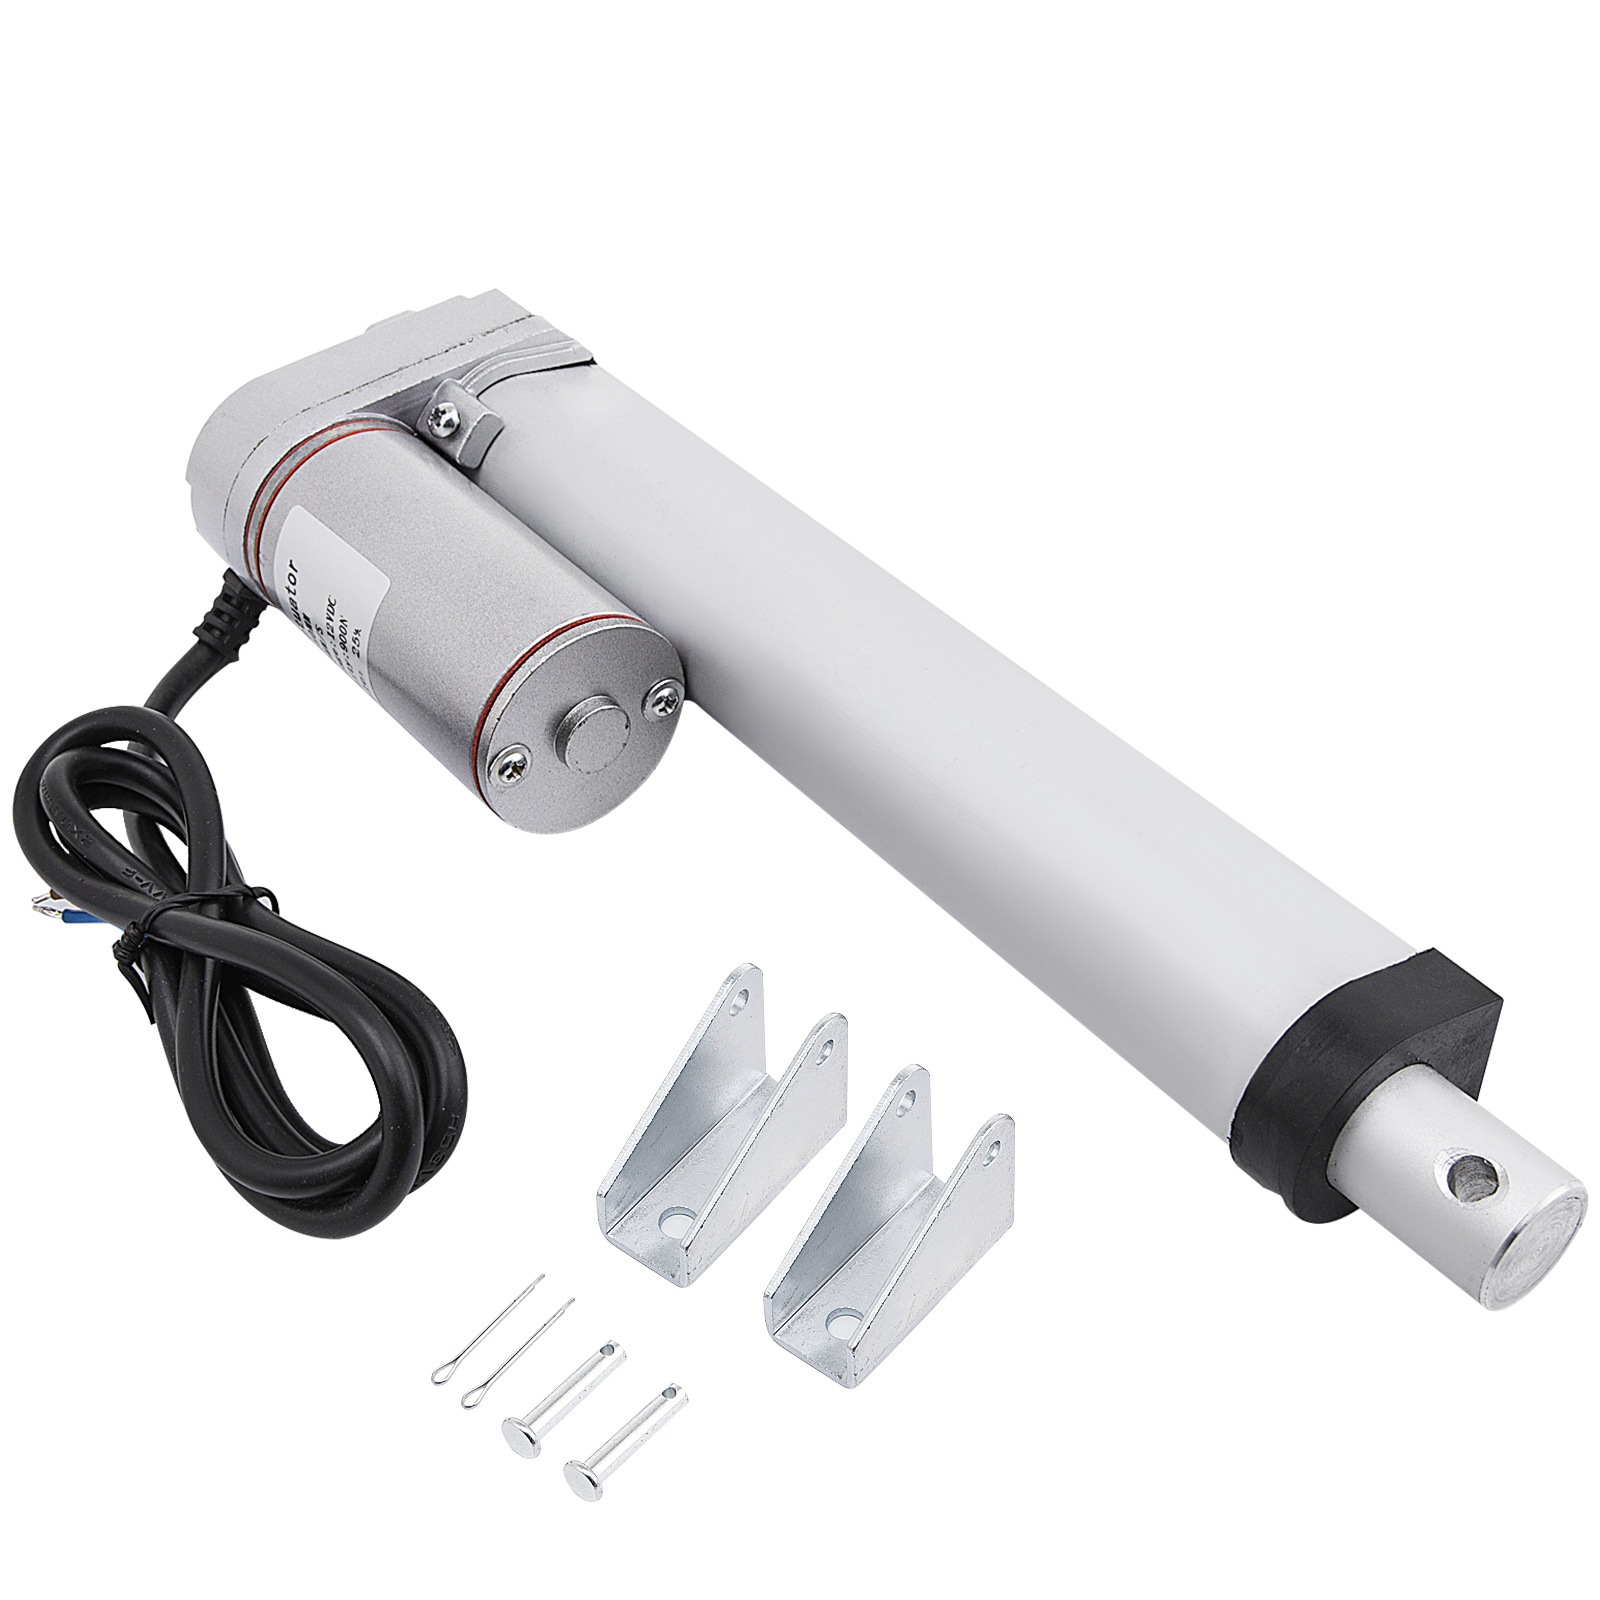 Details about   24V Linear Actuator Stroke Heavy Duty DC Adjustable Opener Electric Motors 